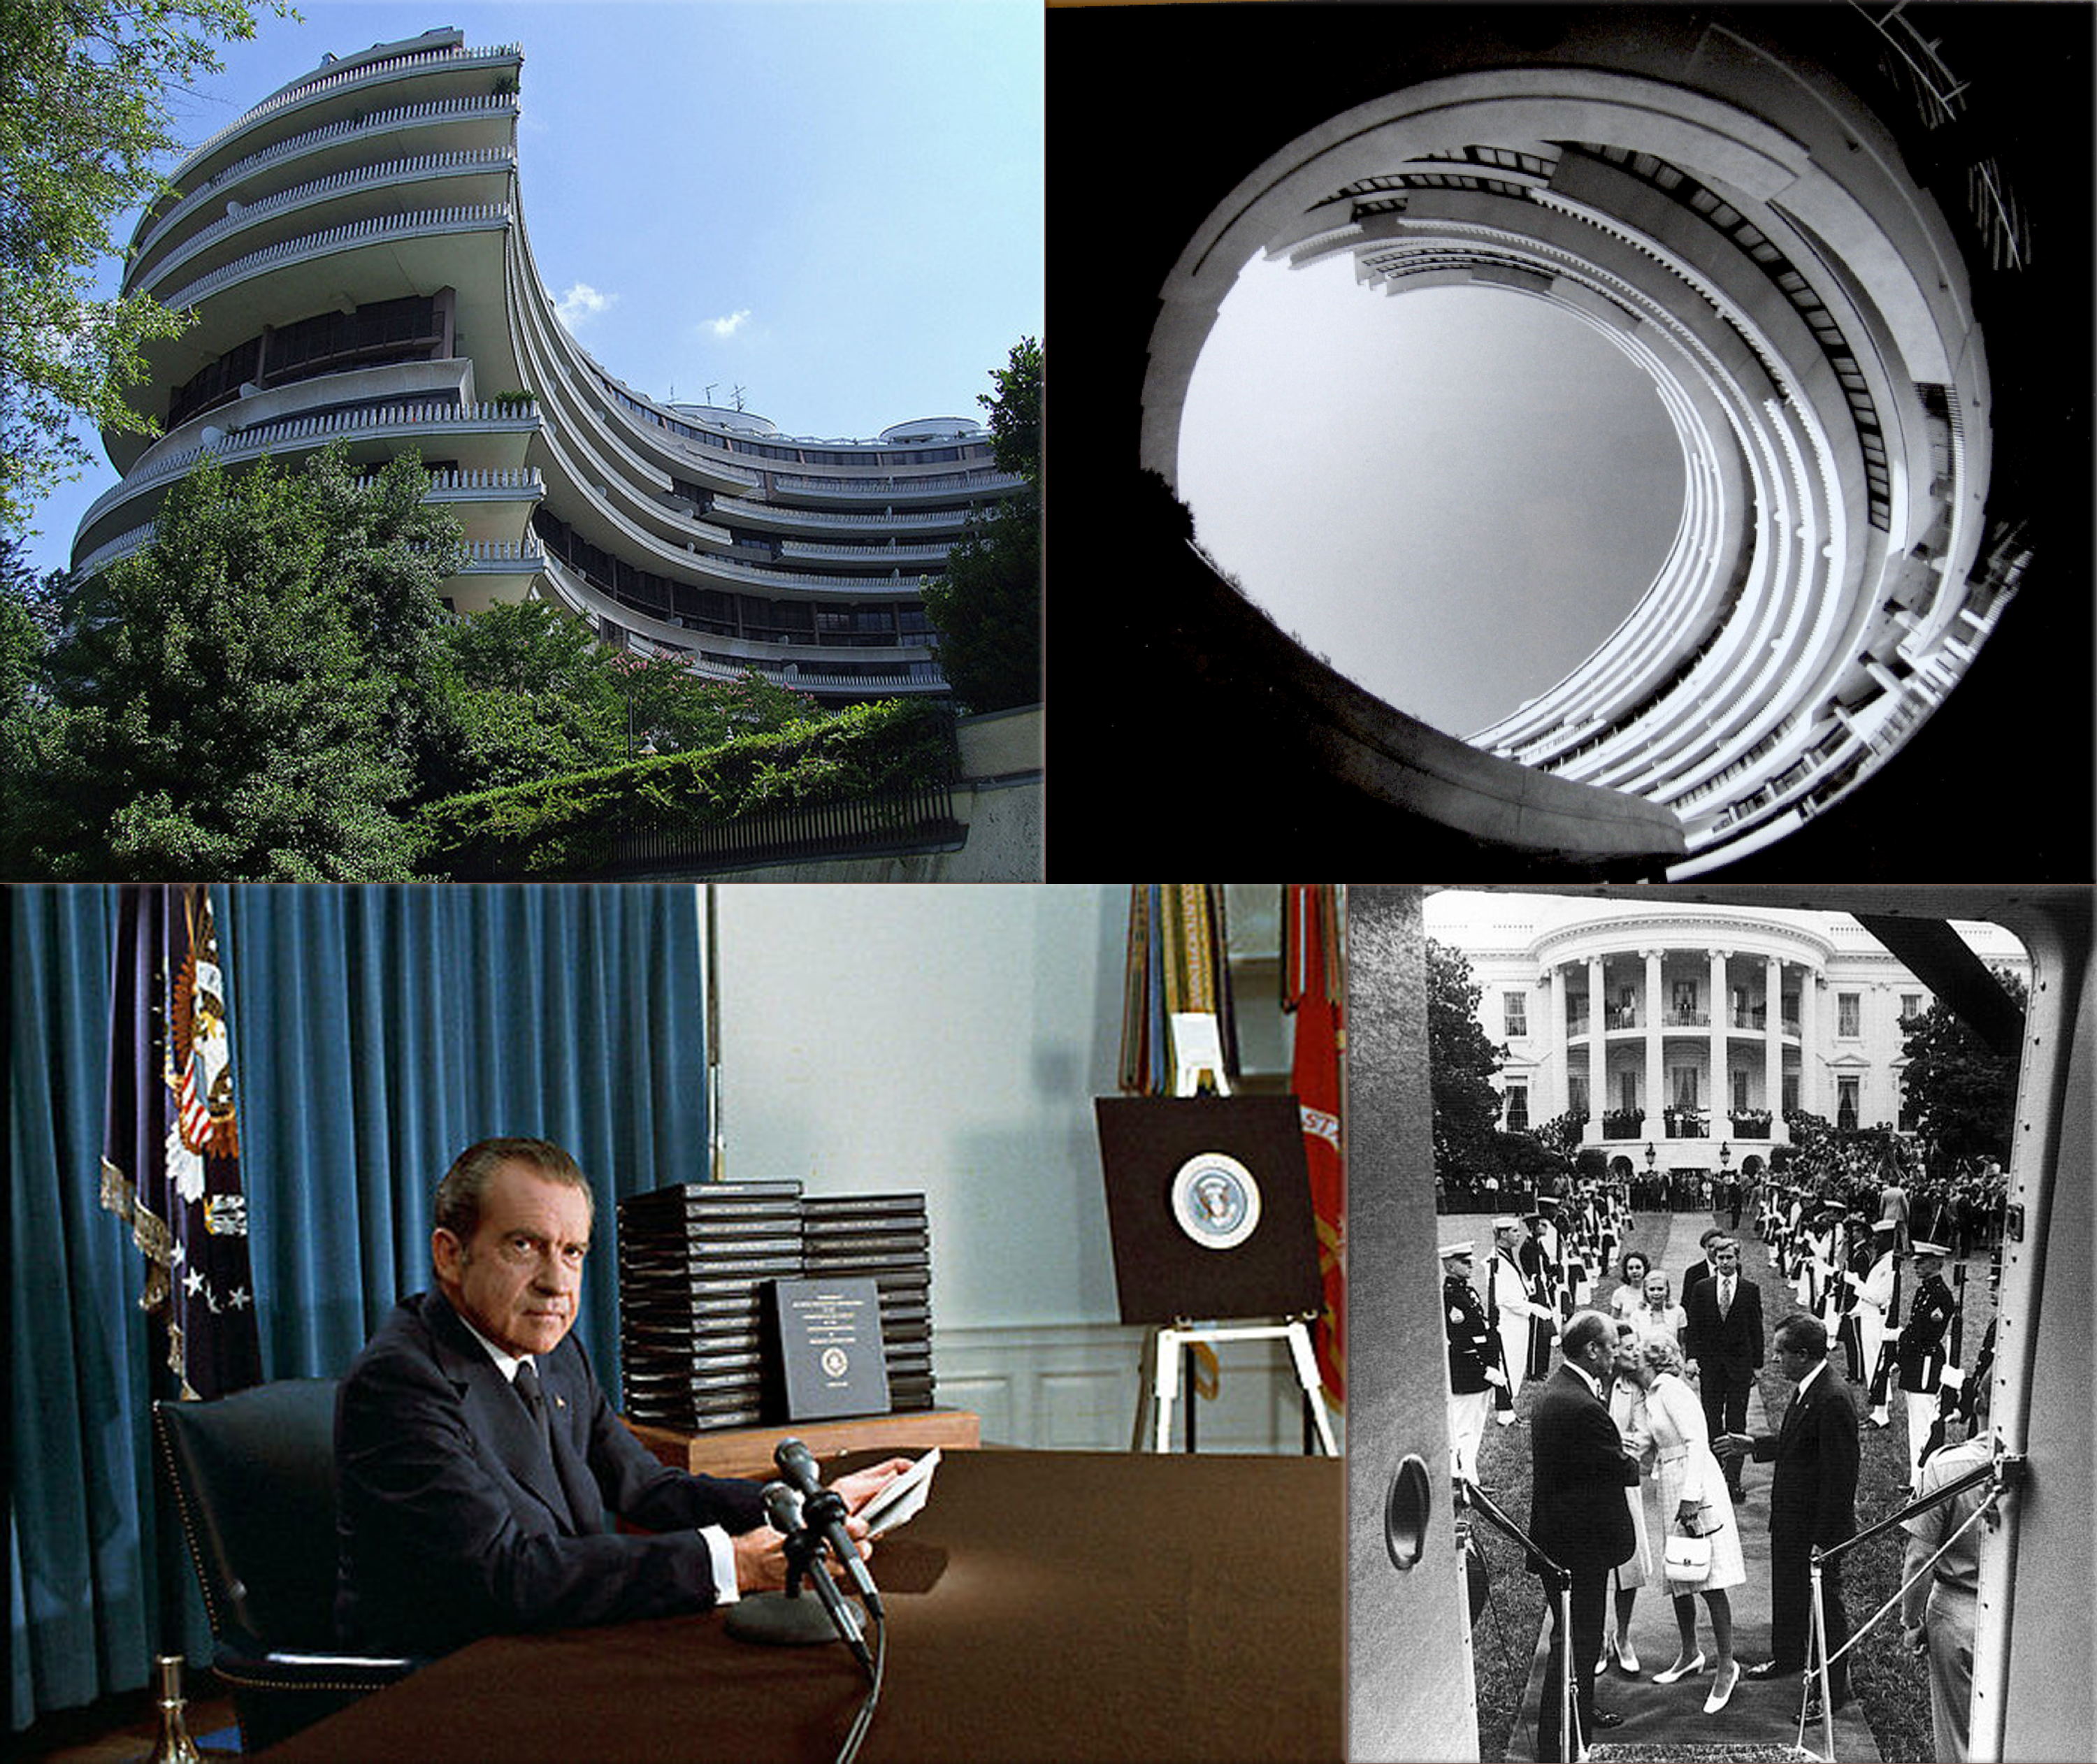 Watergate Scandal: was a political scandal that occurred in the United States in the 1970s as a result of the June 1972 break-in at the Democratic National Committee headquarters at the Watergate office complex in Washington, D.C., and the Nixon administration's attempted cover-up of its involvement